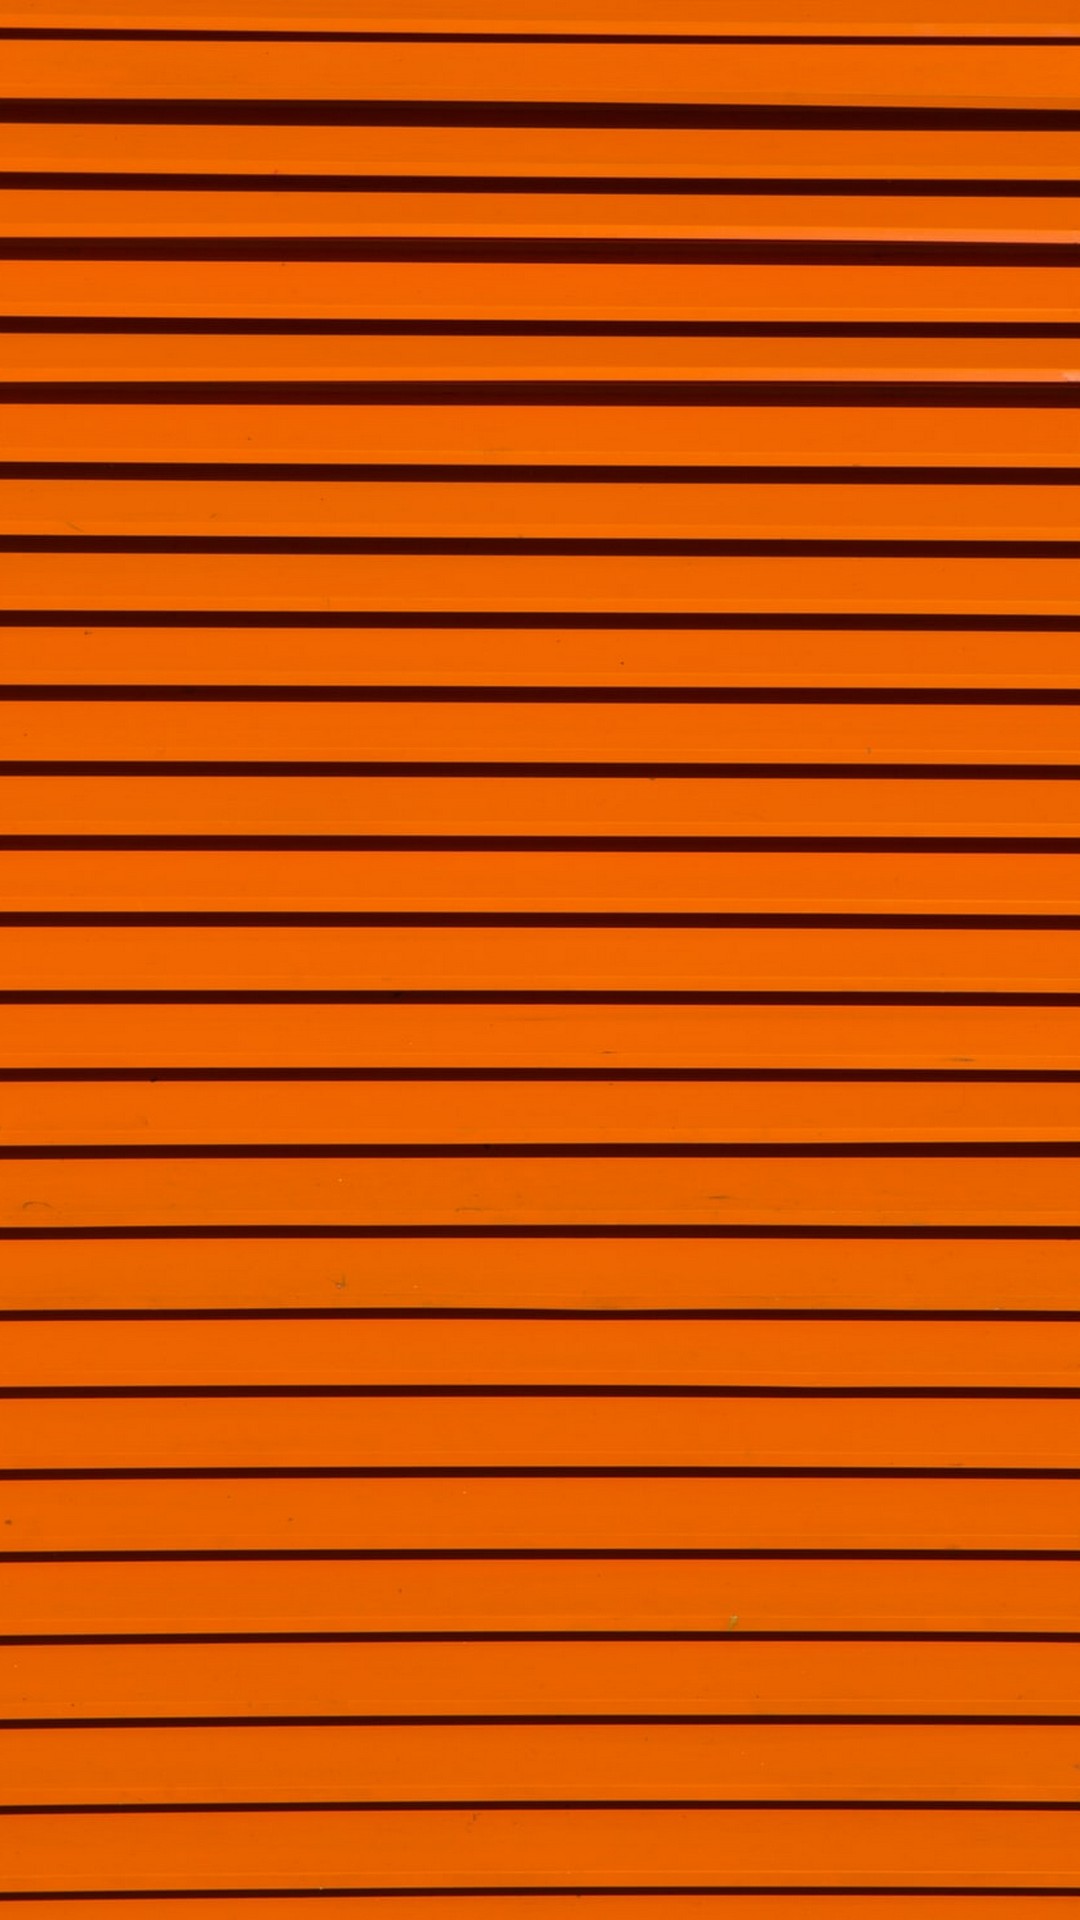 Android Wallpaper Orange Aesthetic With high-resolution 1080X1920 pixel. You can use this wallpaper for your Android backgrounds, Tablet, Samsung Screensavers, Mobile Phone Lock Screen and another Smartphones device